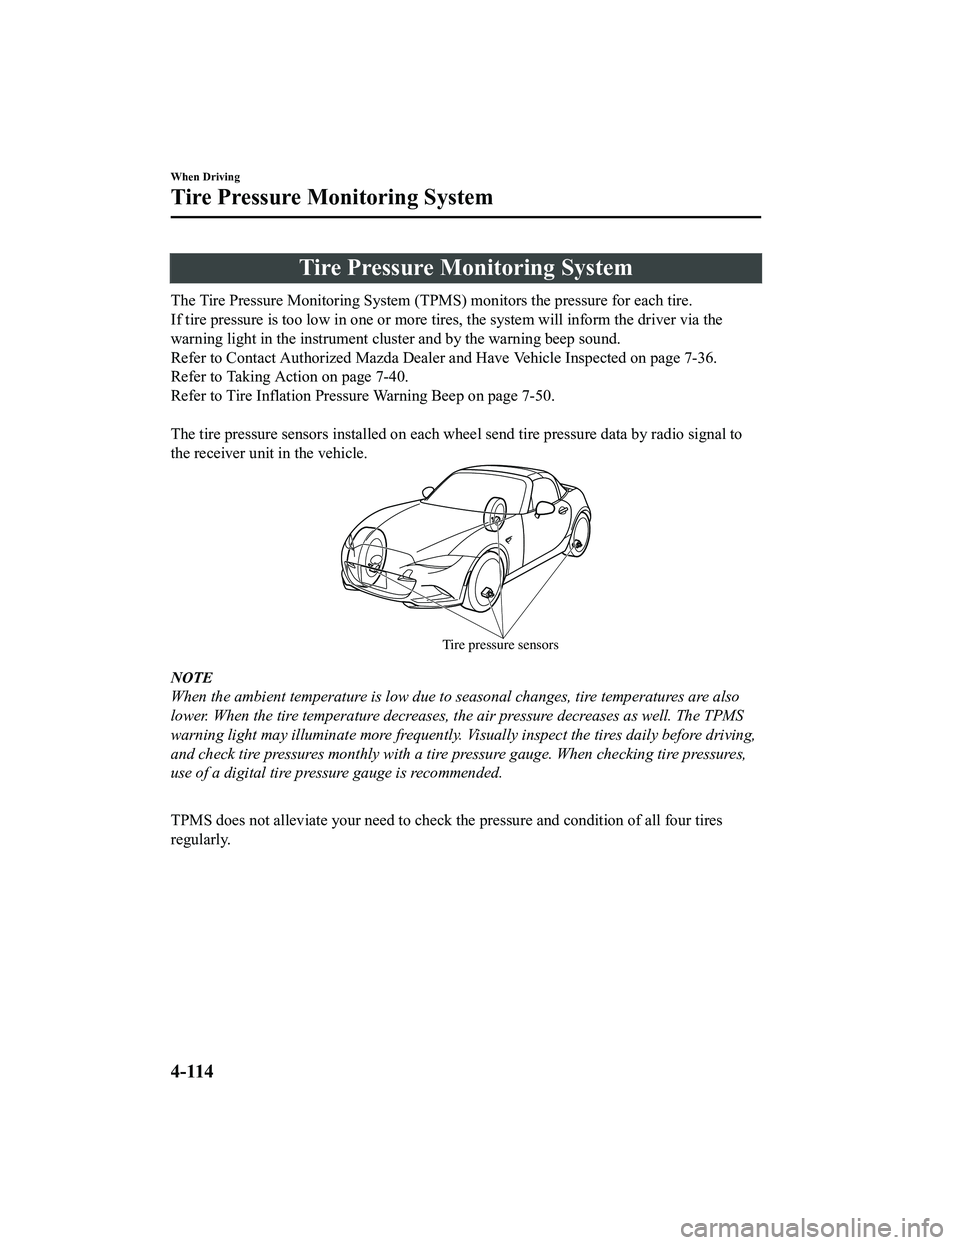 MAZDA MODEL MX-5 MIATA 2022  Owners Manual Tire Pressure Monitoring System
The Tire Pressure Monitoring System (TPMS) monitors the pressure for each tire.
If tire pressure is too low in one or more tires, the system  will inform the driver via